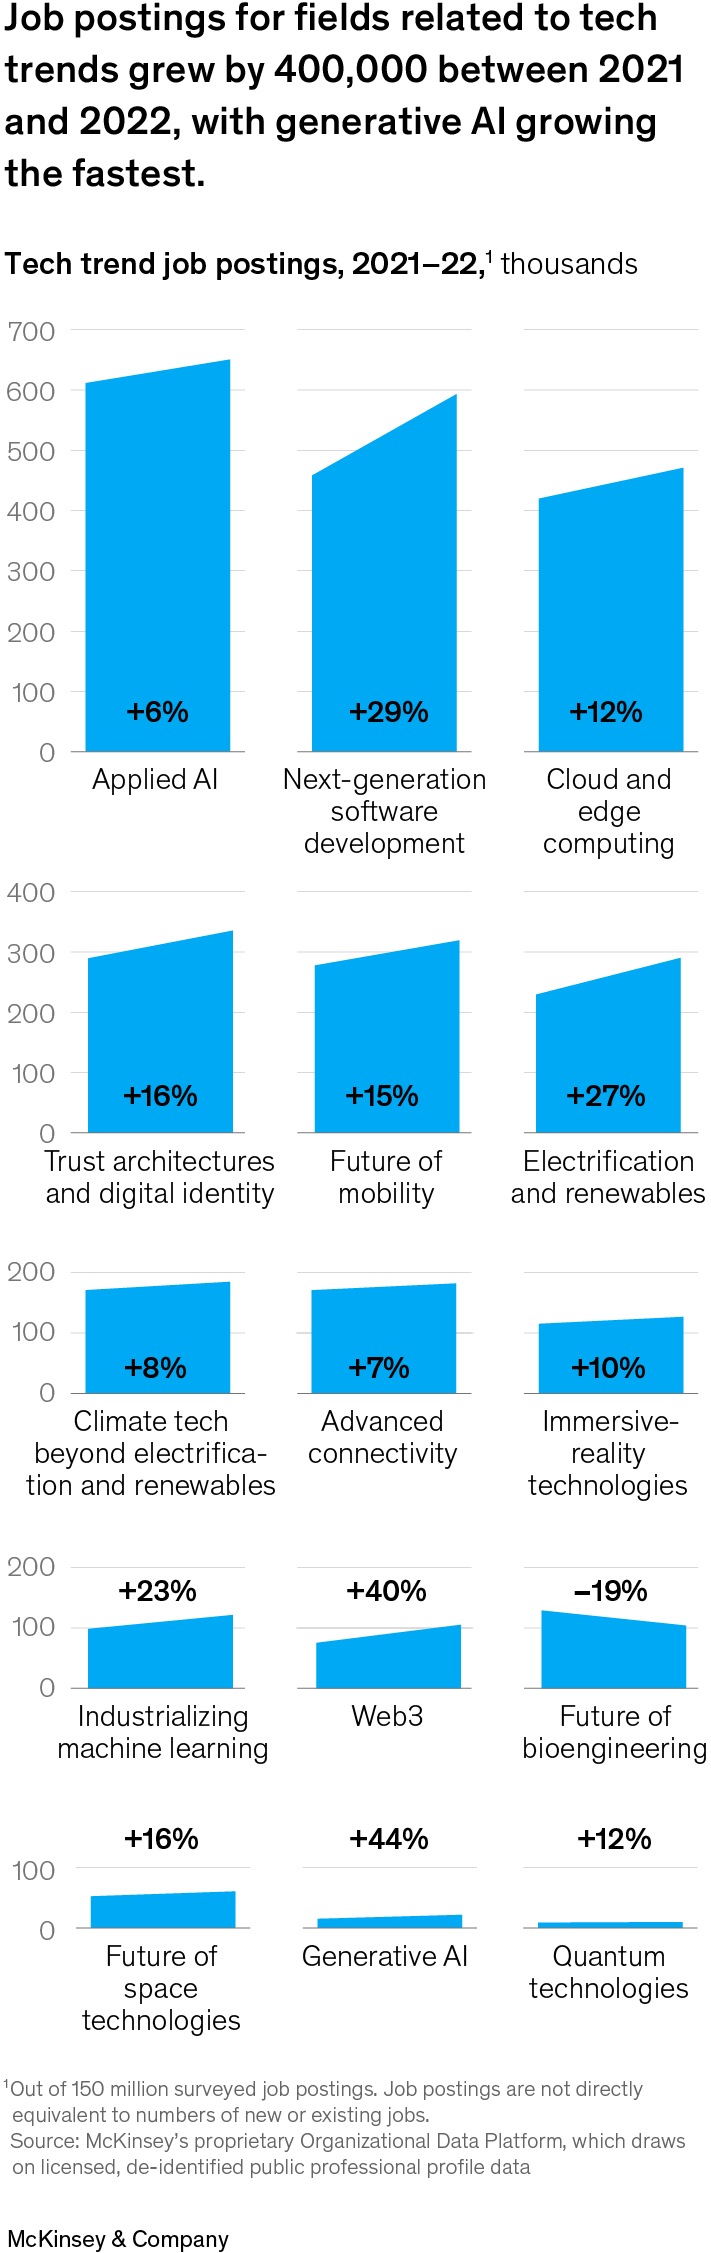 Job posting for fields related to tech trends grew by 400,000 between 2021 and 2022, with generative AI growing the fastest.